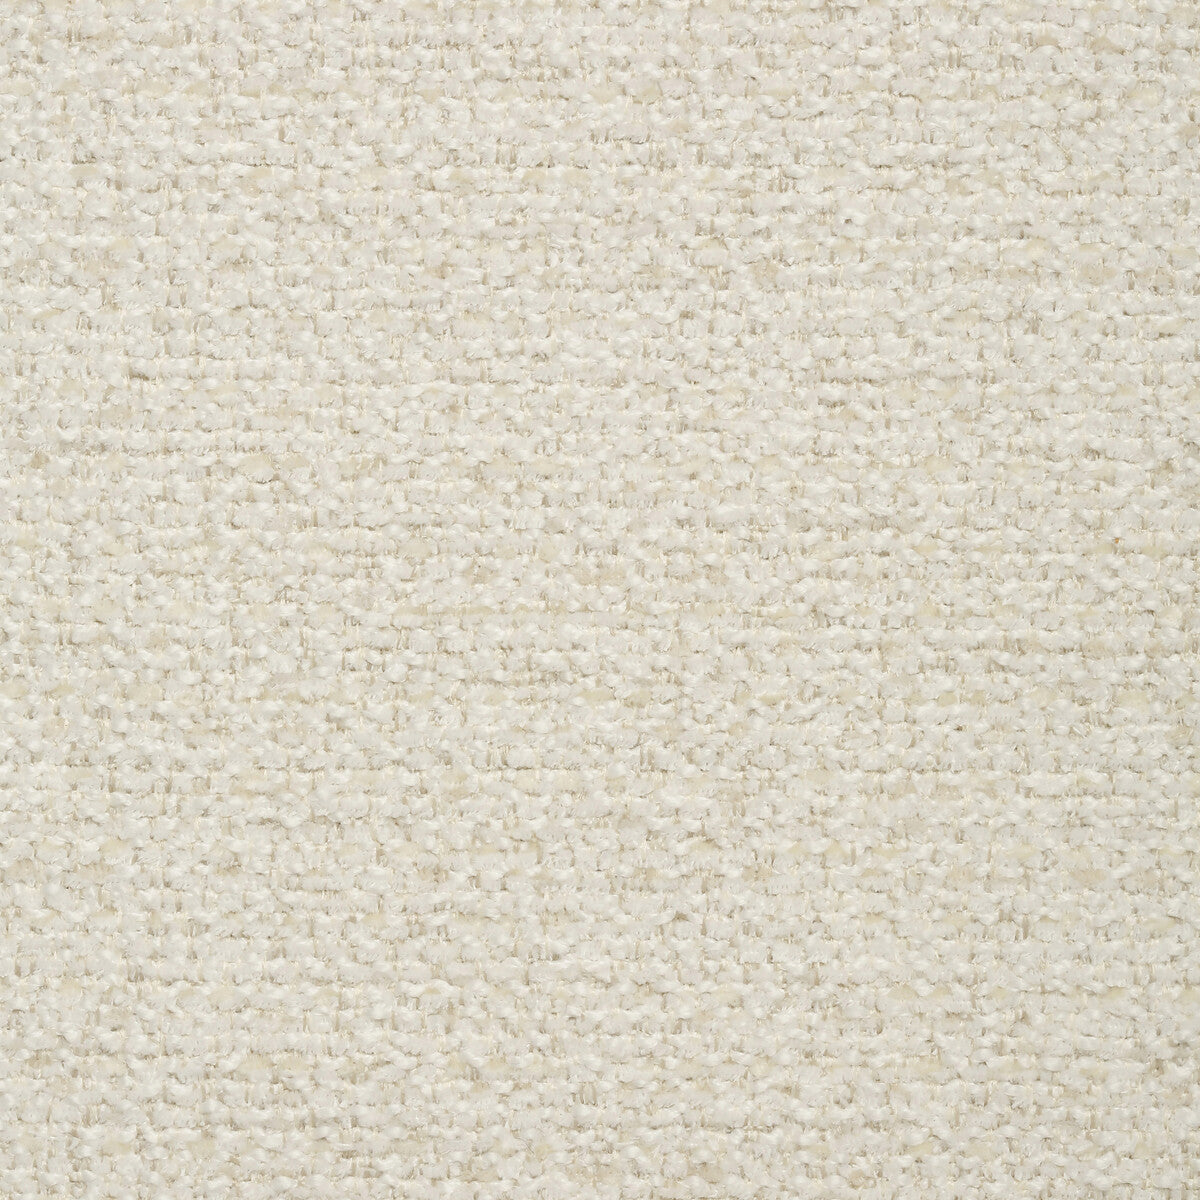 Kravet Smart fabric in 35117-111 color - pattern 35117.111.0 - by Kravet Smart in the Performance Crypton Home collection